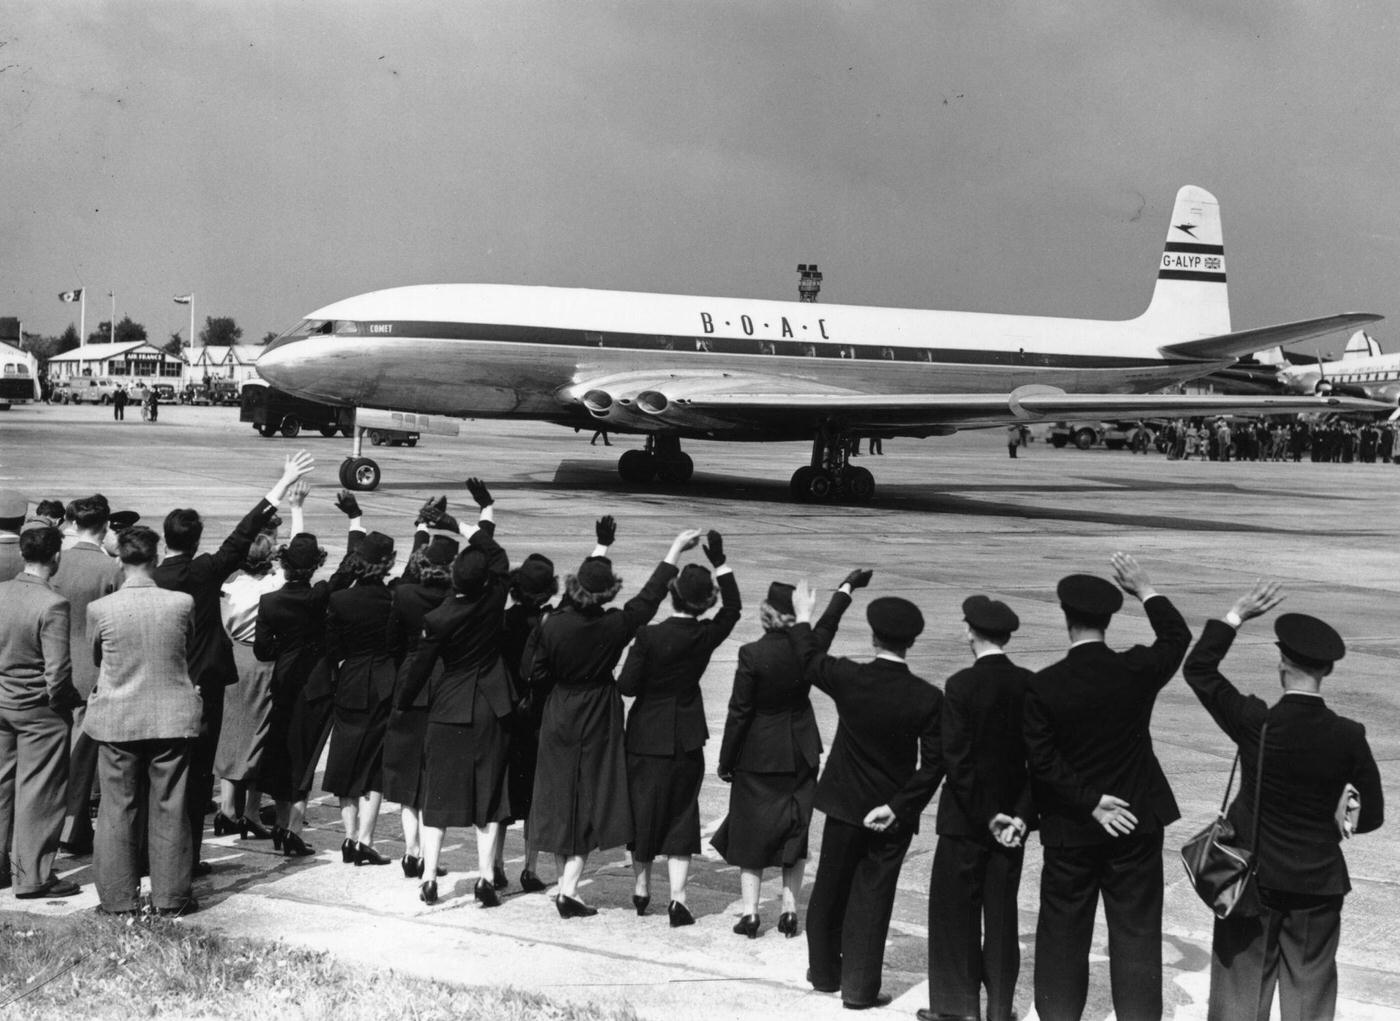 The BOAC Comet is seen taxiing on the runway at London Airport before flying to Johannesburg, marking the world's first jet passenger service.